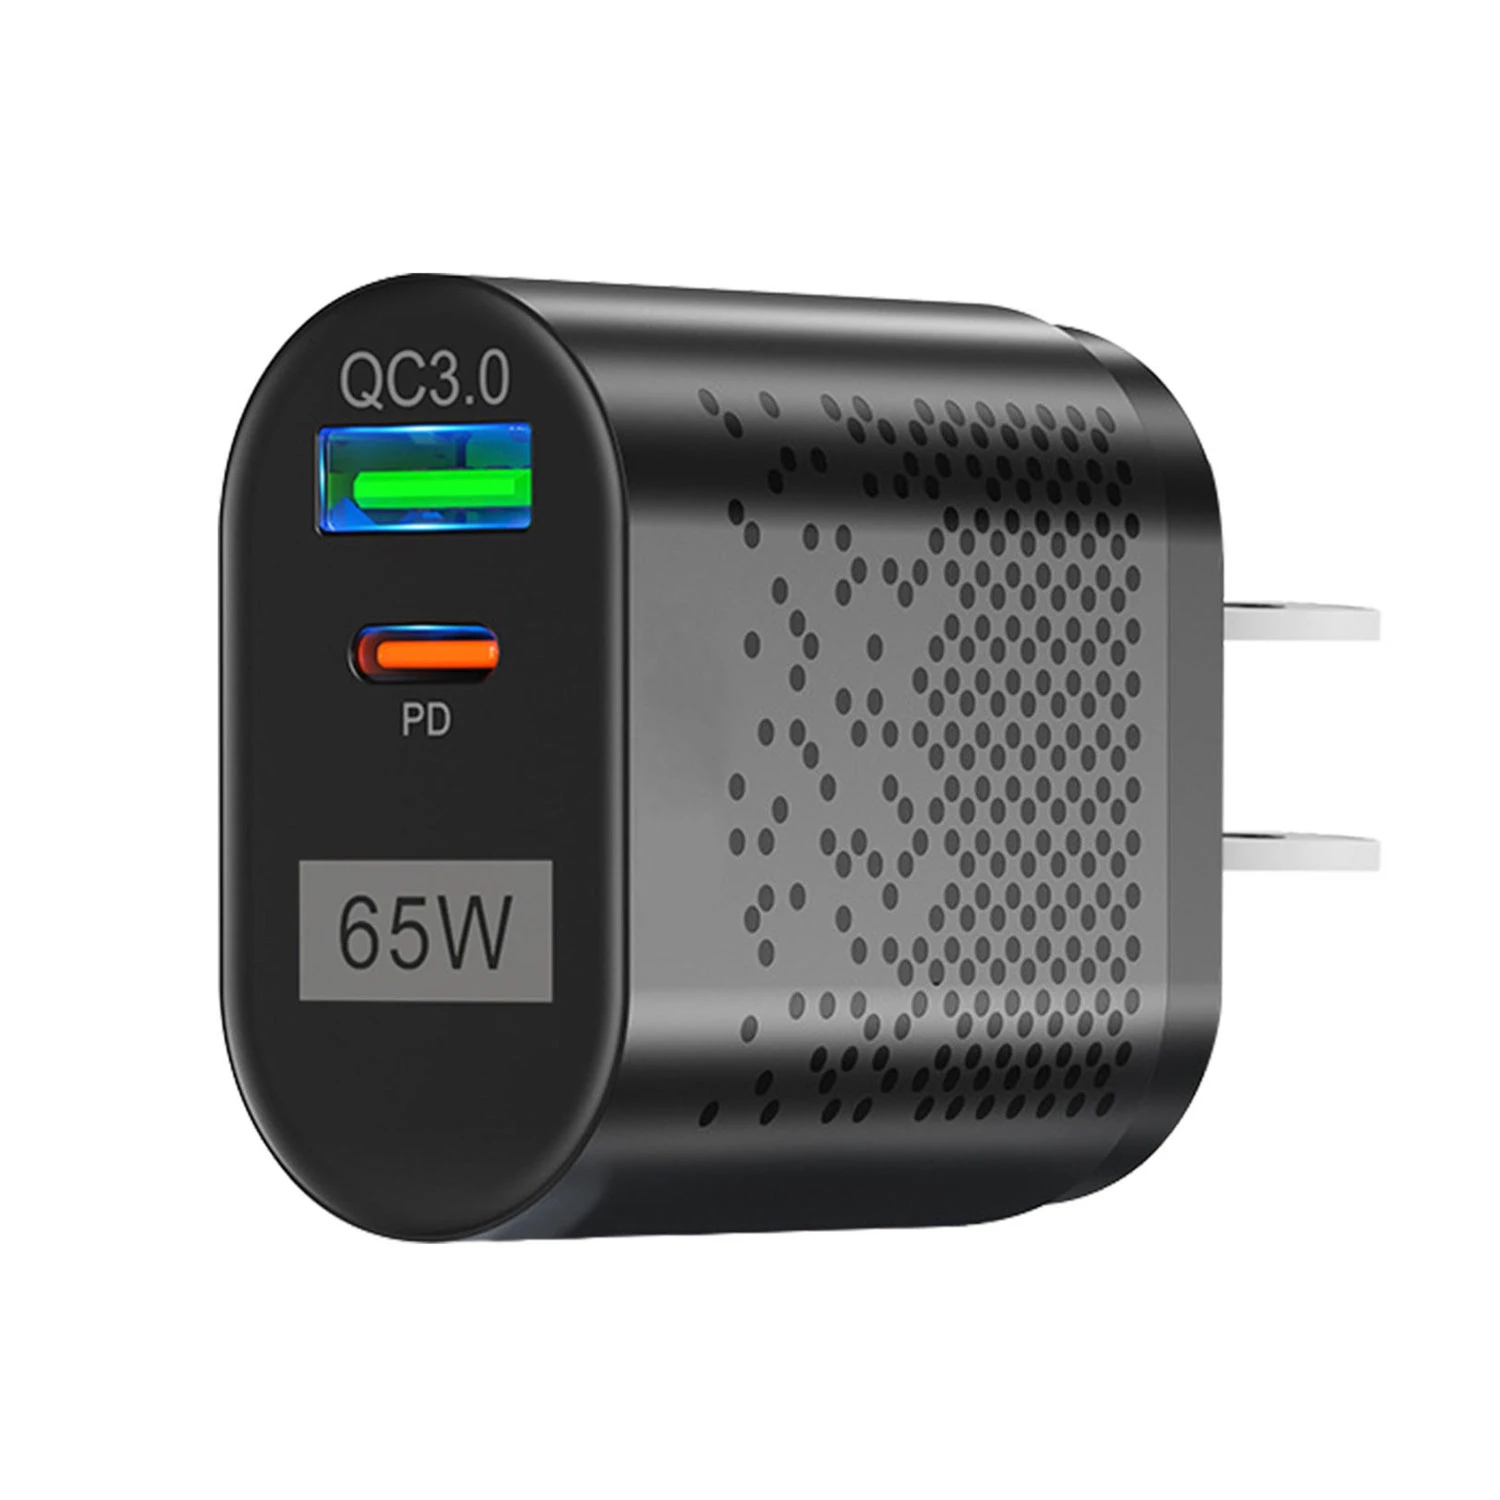 65W Type C Fast Wall Charger - PD QC3.0 Adapter for iPhone